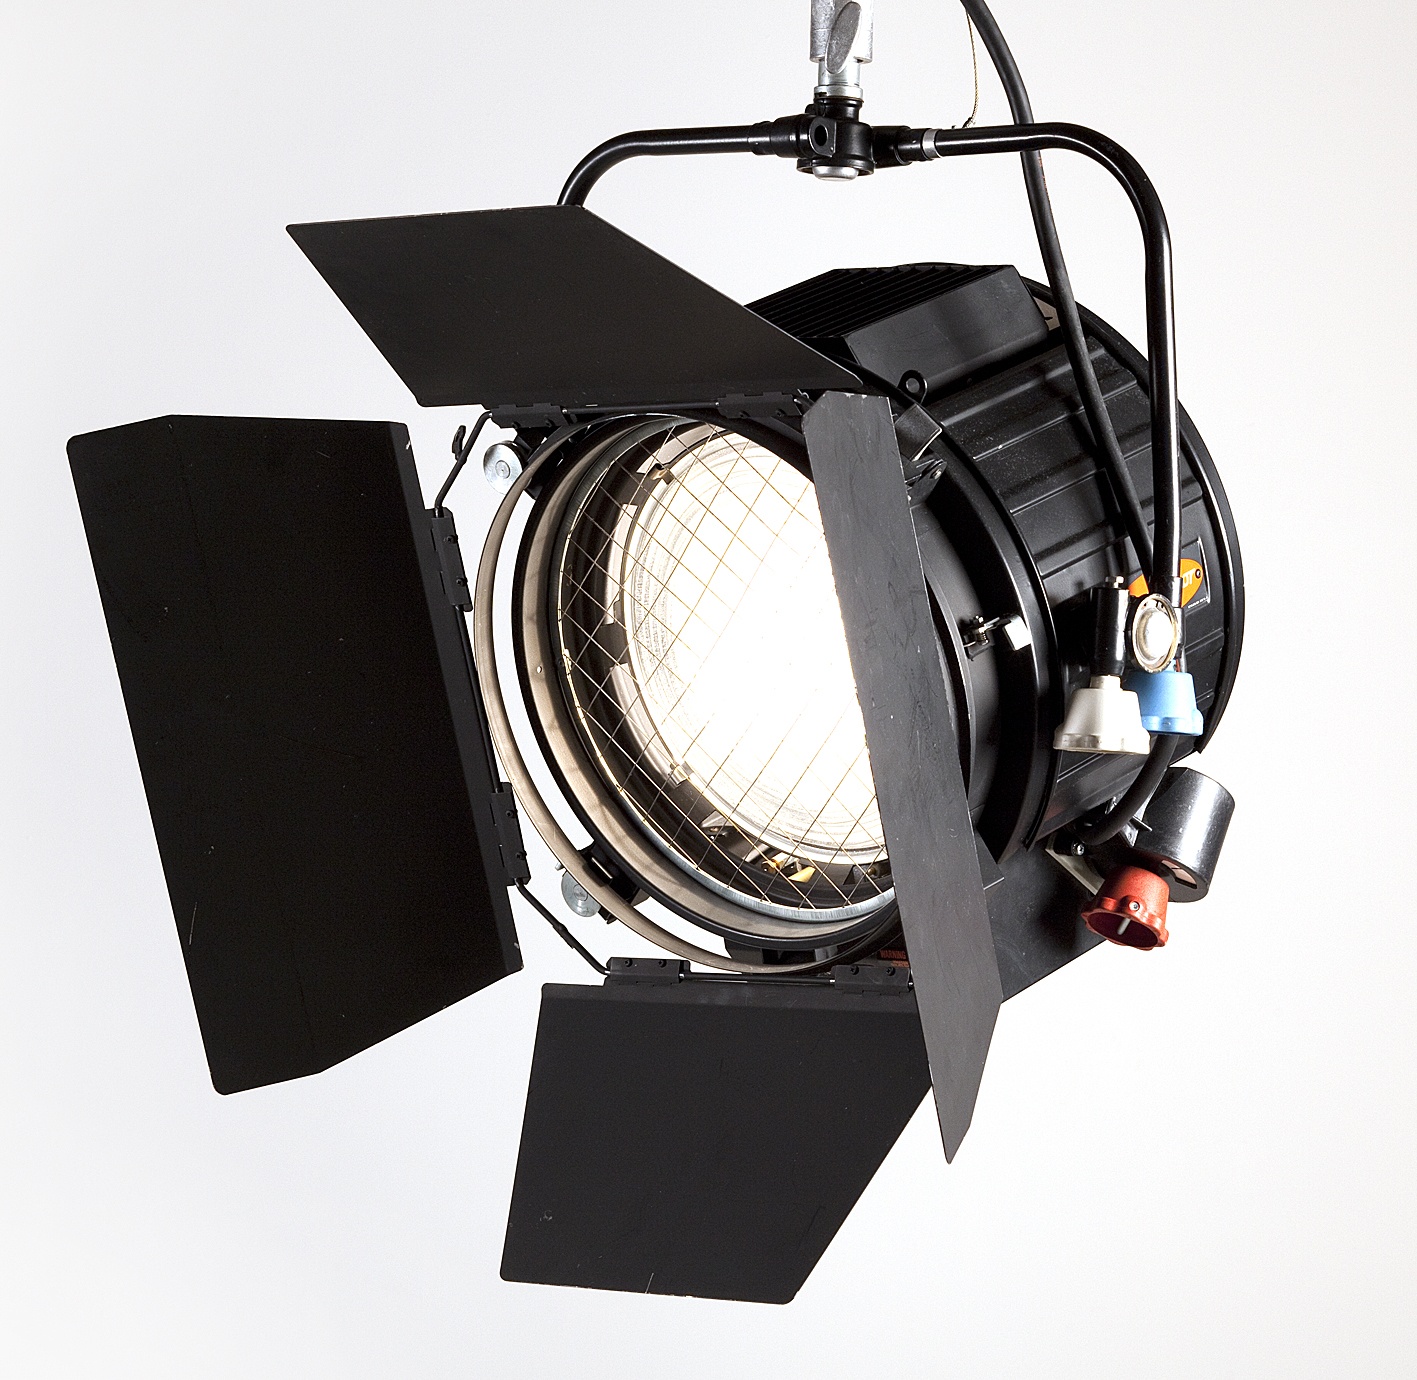 Fresnel 5 kW Strand Pollux, Pole Operated, Black, 32/1